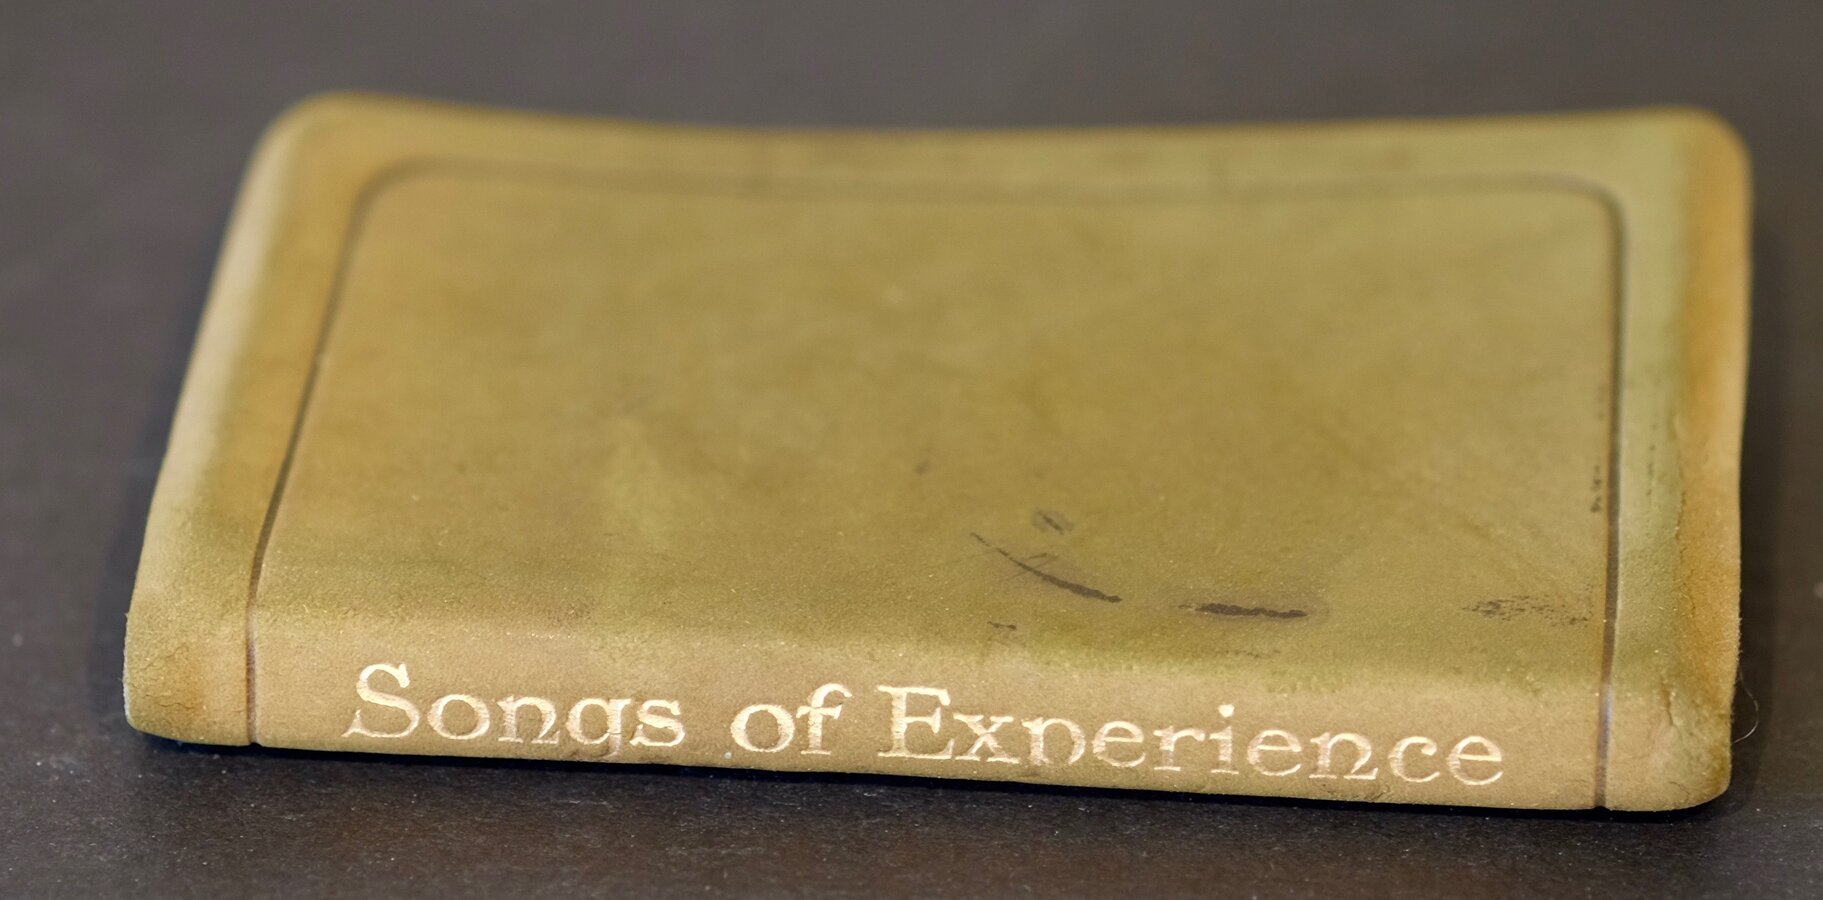 Songs of Experience by William Blake